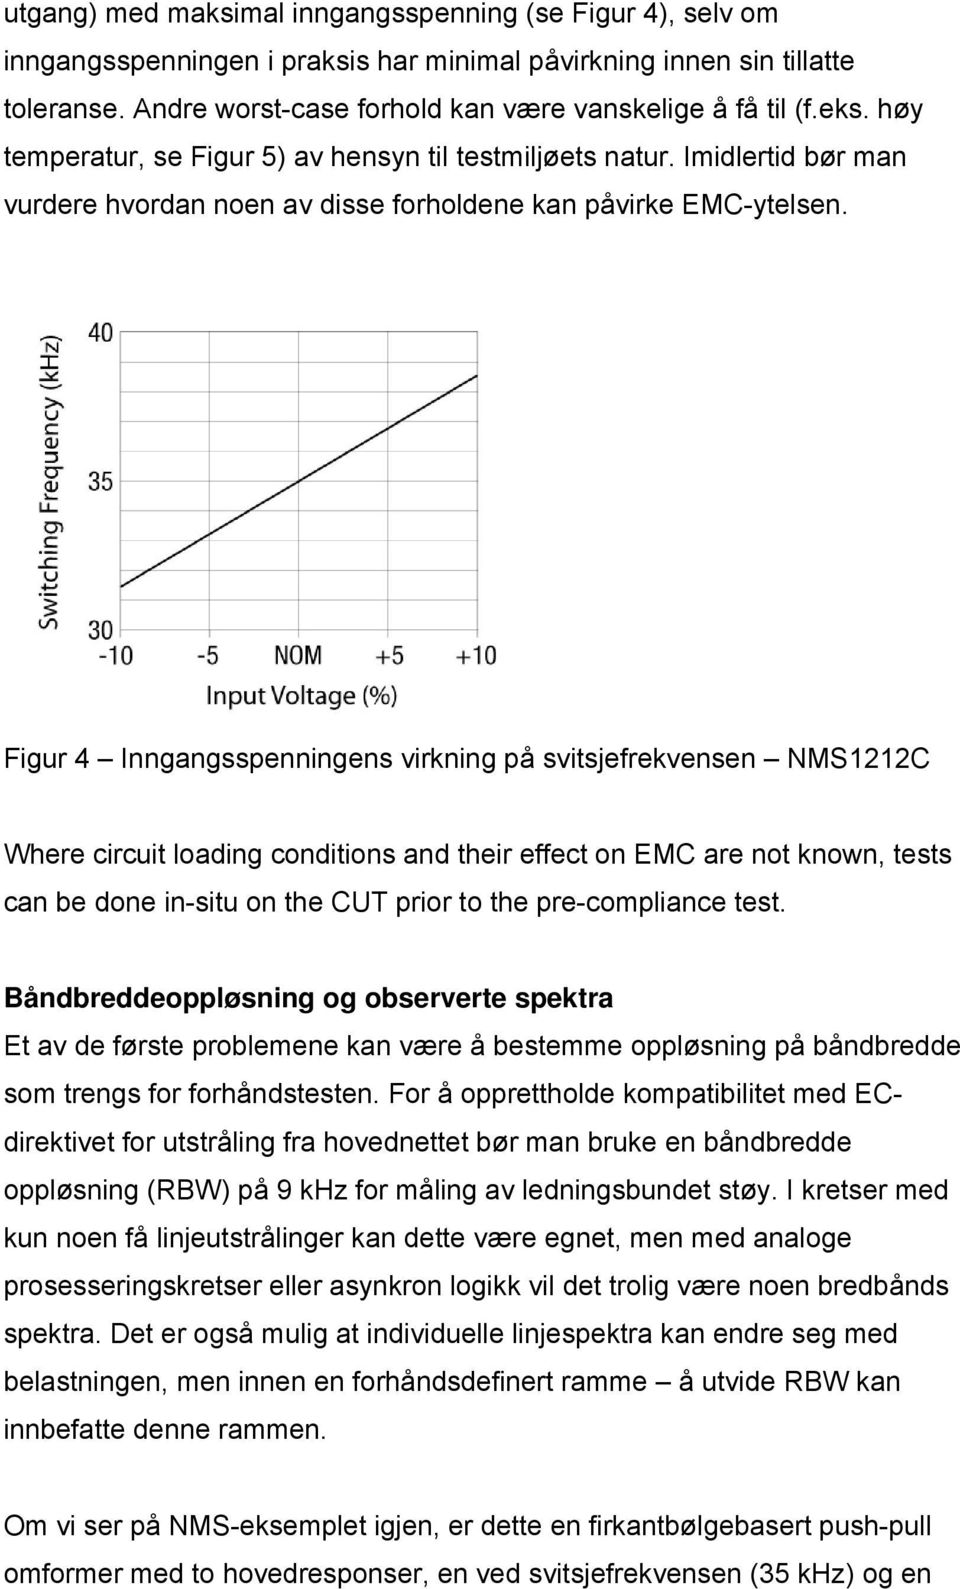 Figur 4 Inngangsspenningens virkning på svitsjefrekvensen NMS1212C Where circuit loading conditions and their effect on EMC are not known, tests can be done in-situ on the CUT prior to the